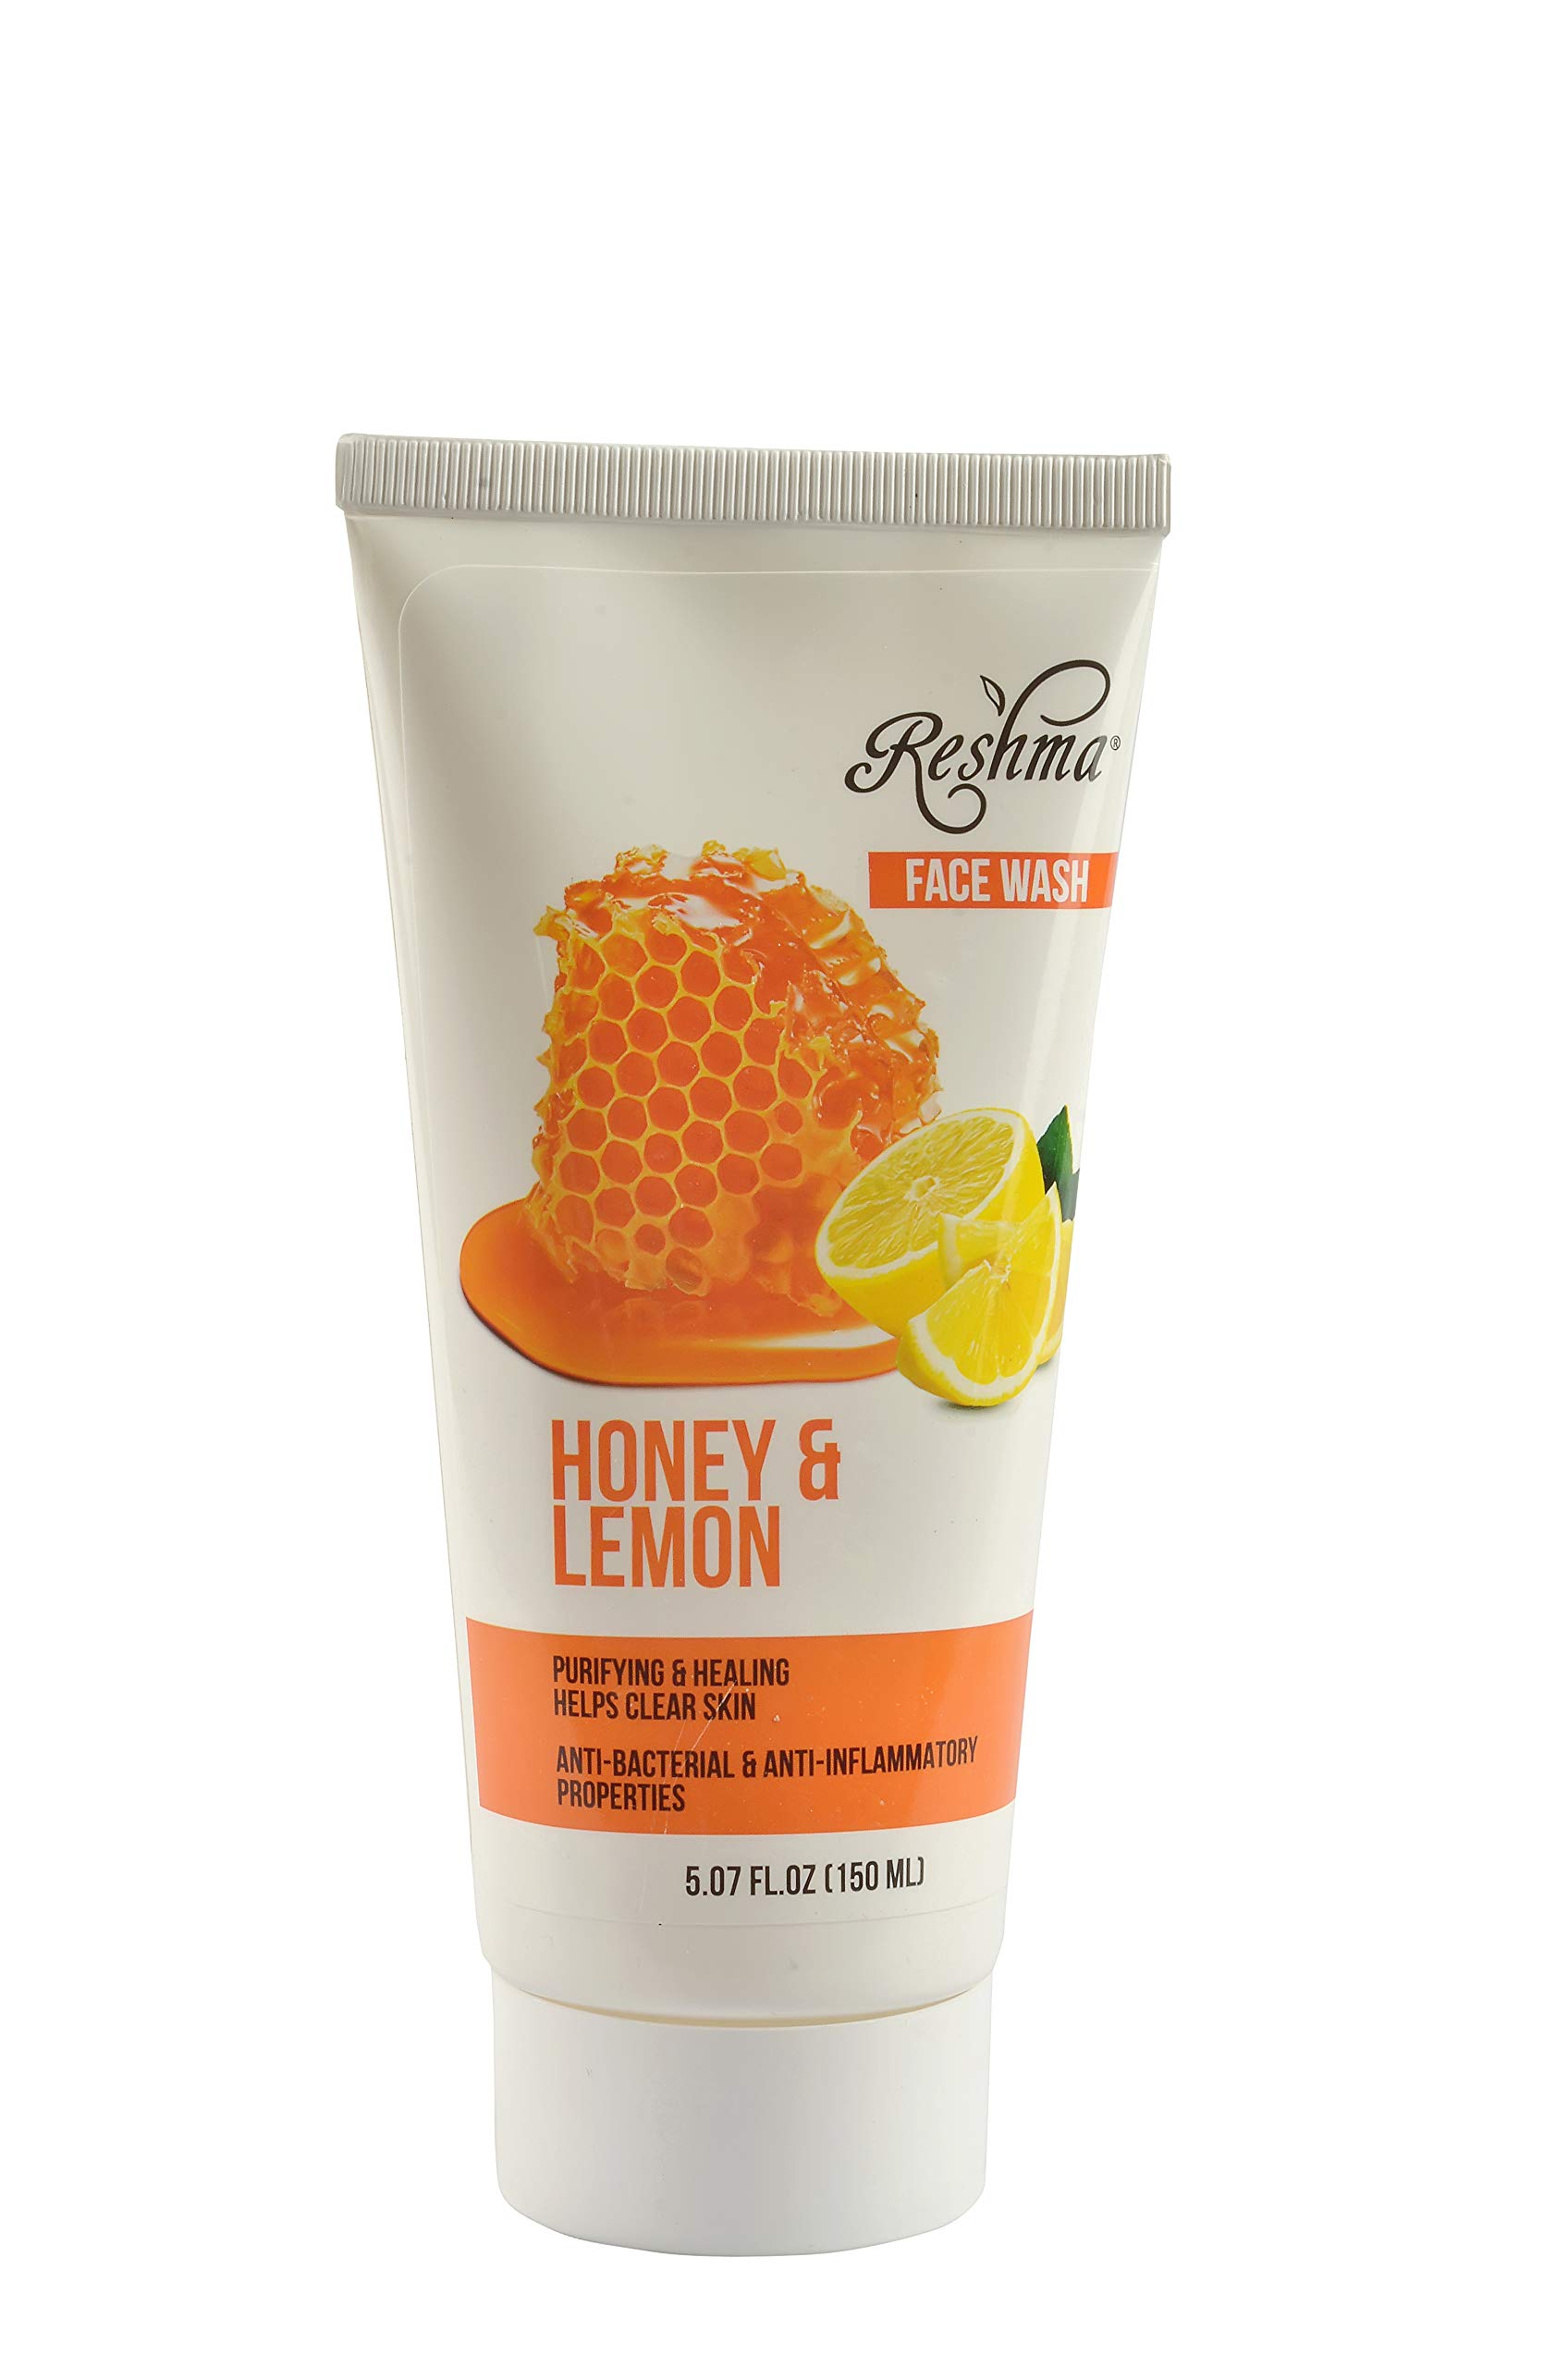 Reshma Beauty Honey & Lemon Face Wash Purifies, Nourishes, and Soothes to Naturally Cleanse Pores for Clear Skin Anti-Inflammatory Properties, Pack Of 1